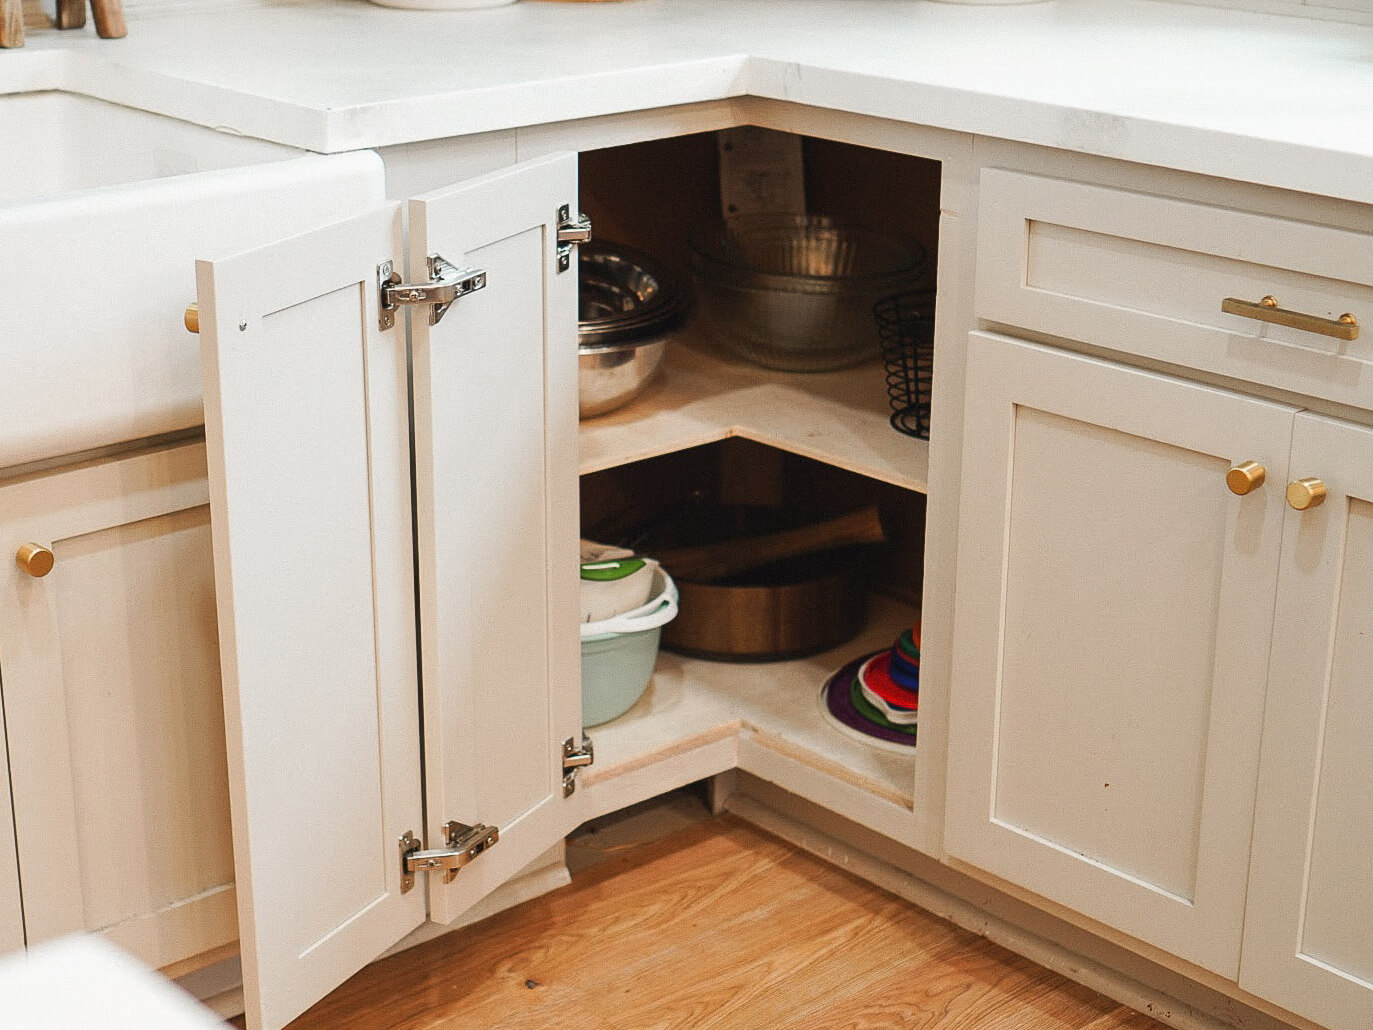 Styled kitchen cabinet after DIY removal of a Lazy Susan.